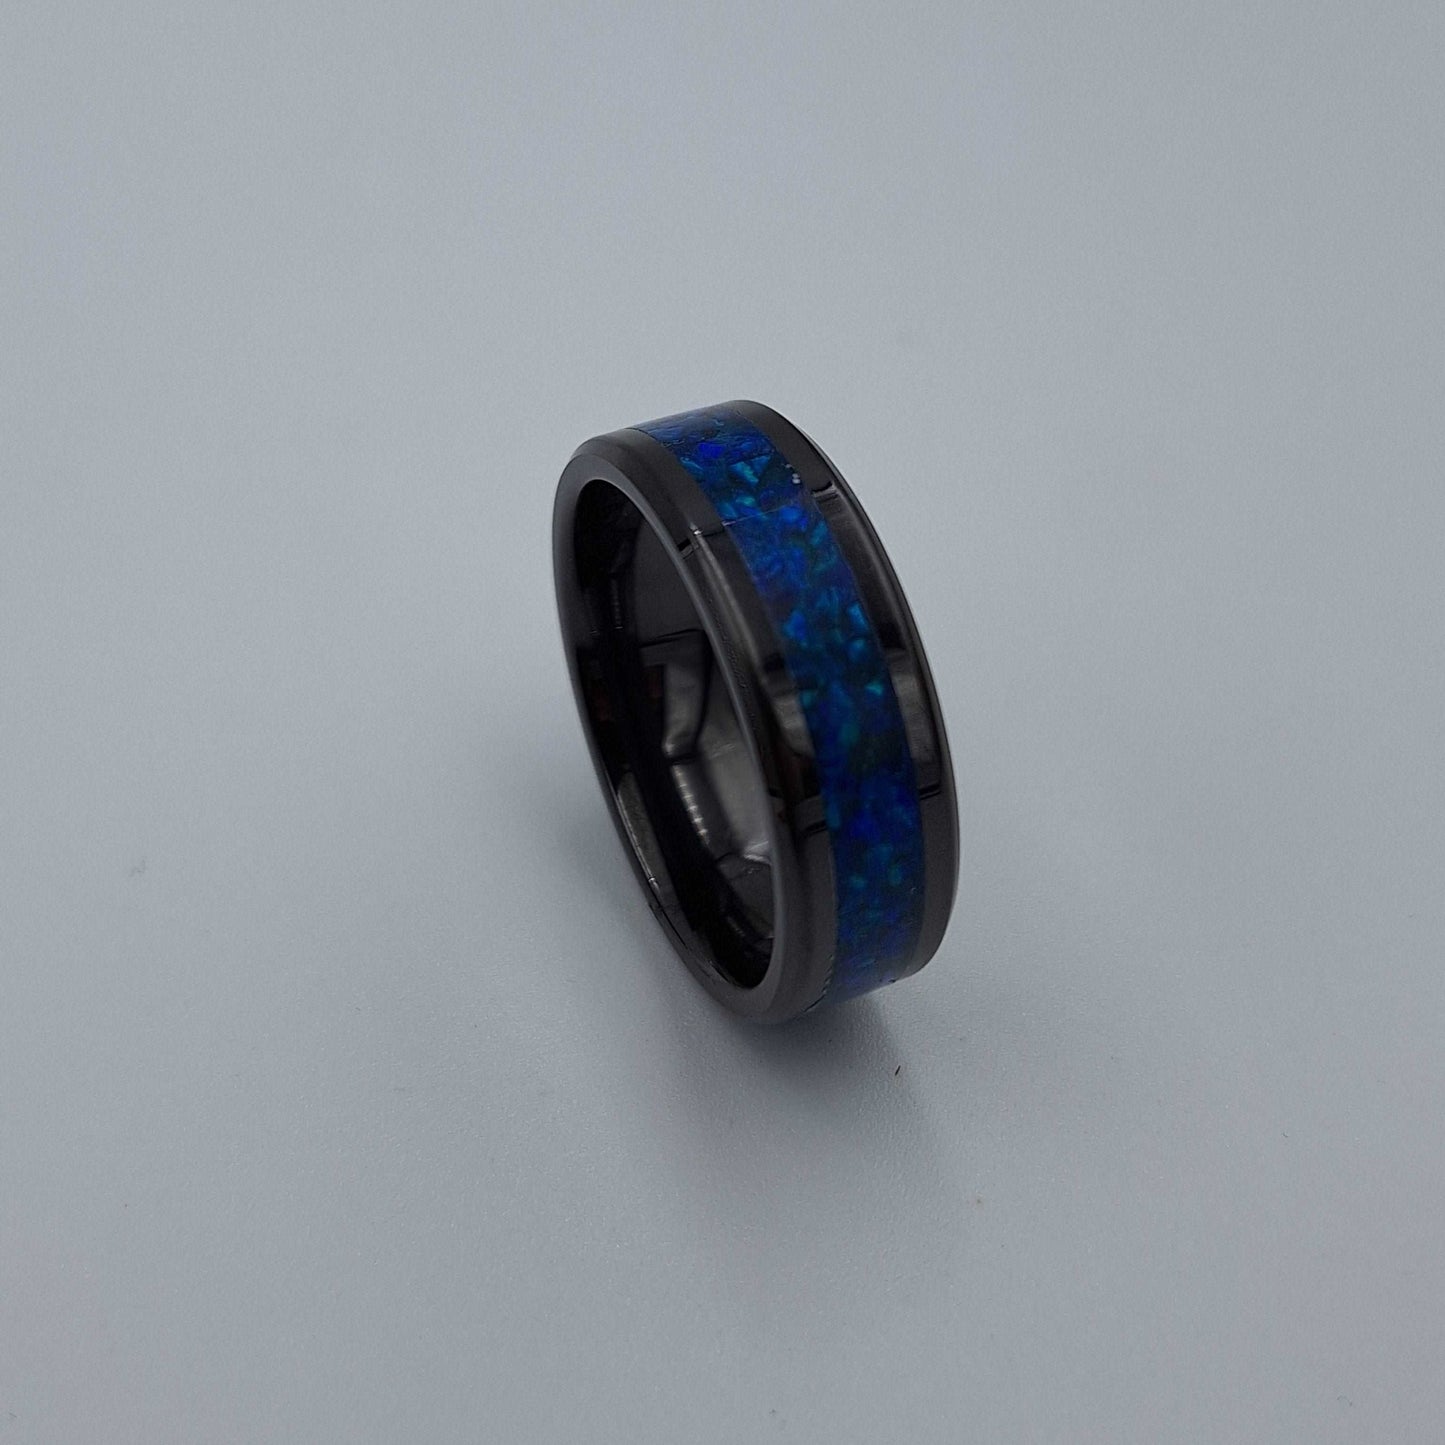 Black Ceramic 8mm Ring With Crushed Opals - Size 13